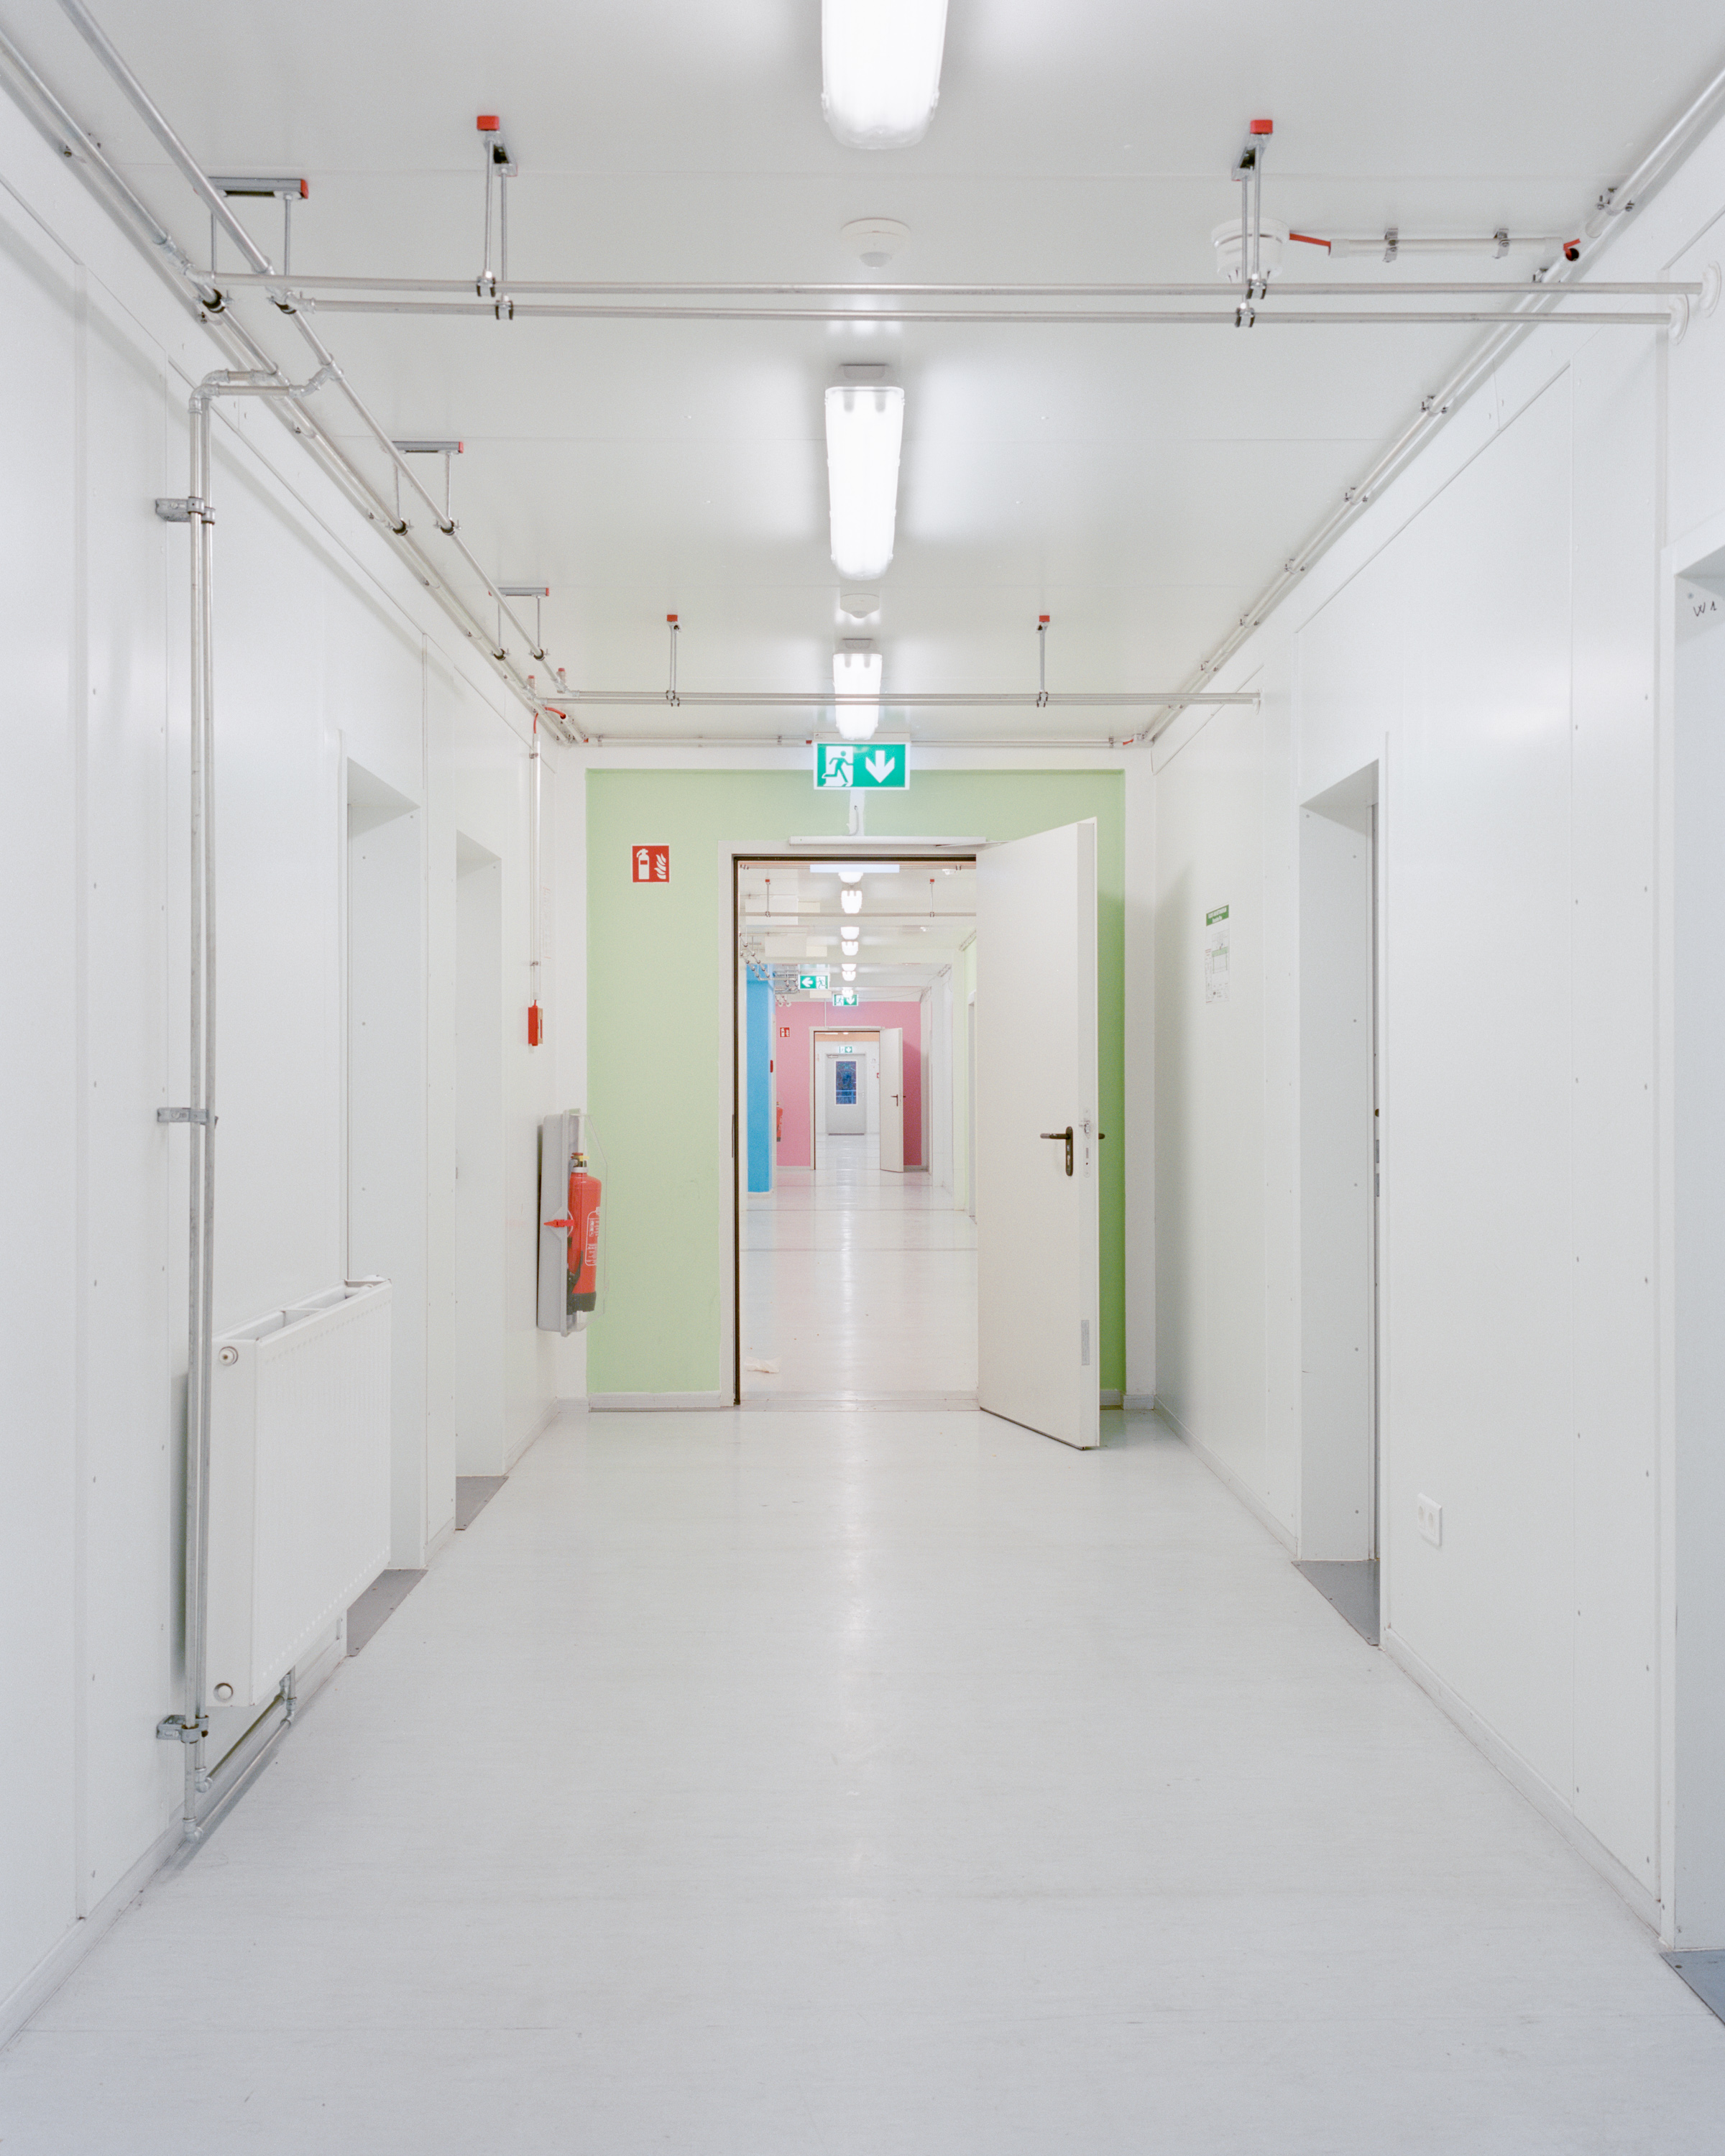 You see the hallway of a refugee accommodation. It is very similar to a hospital.